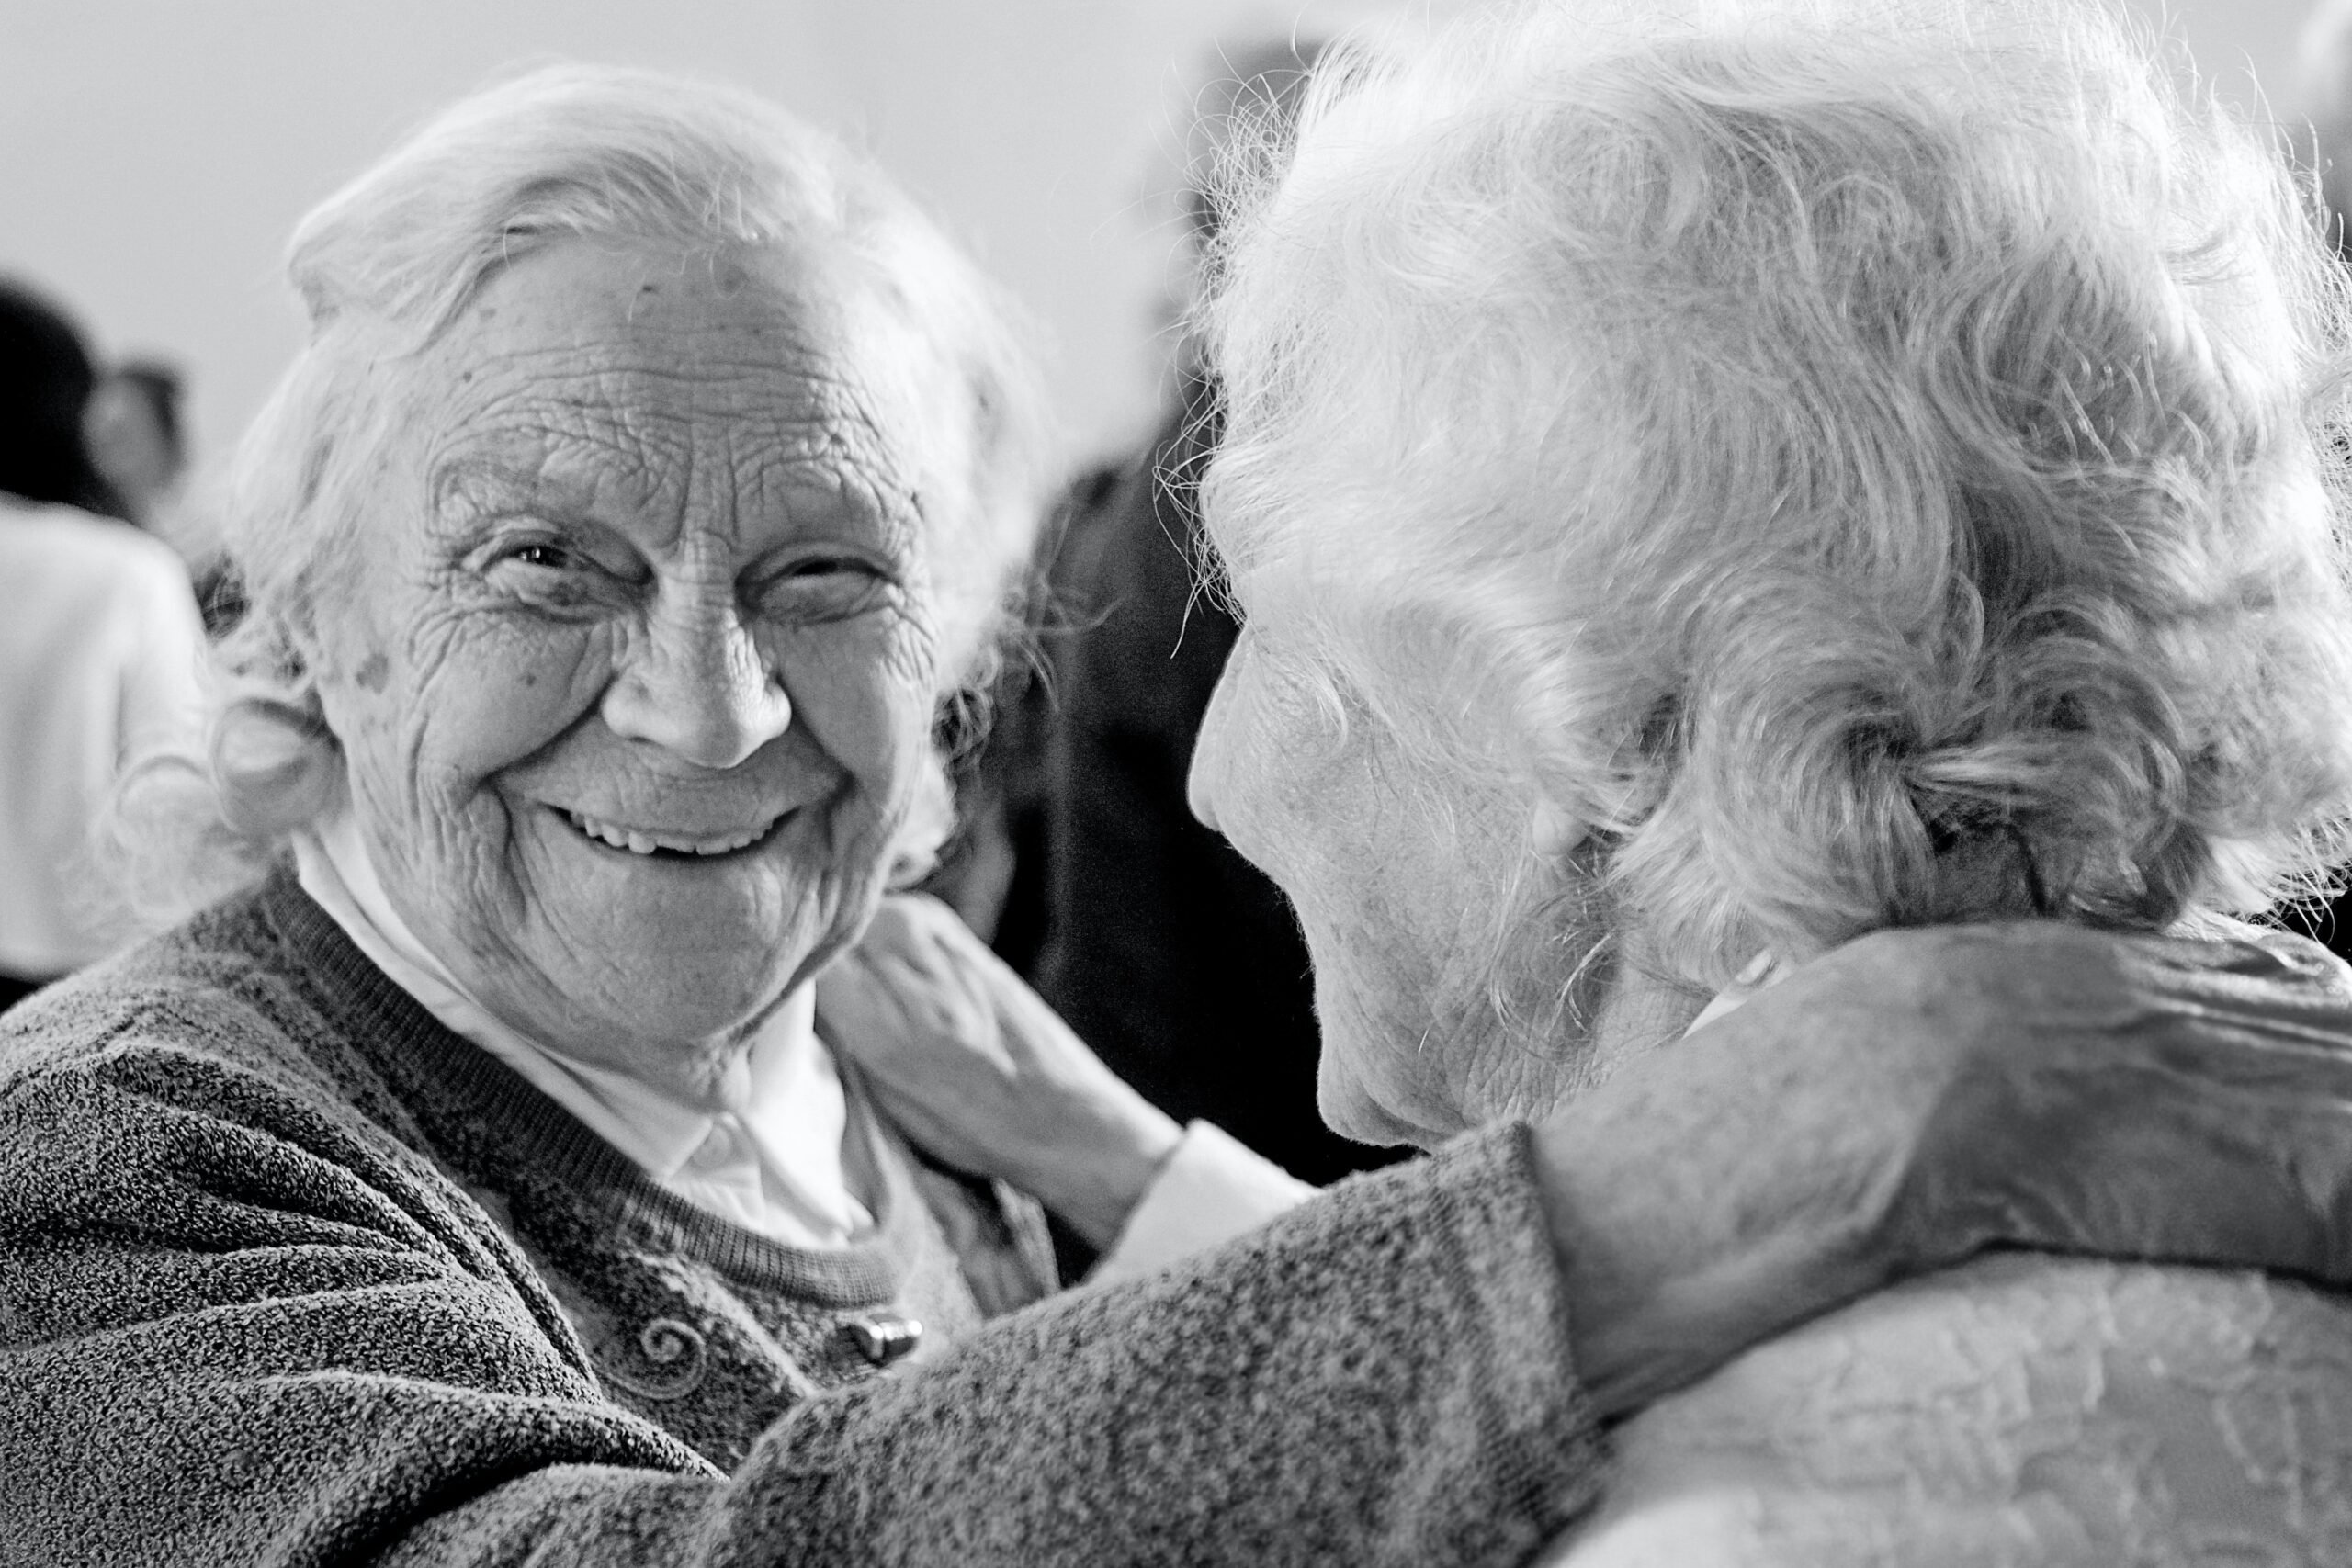 Black and white photo of elderly couple dancing together